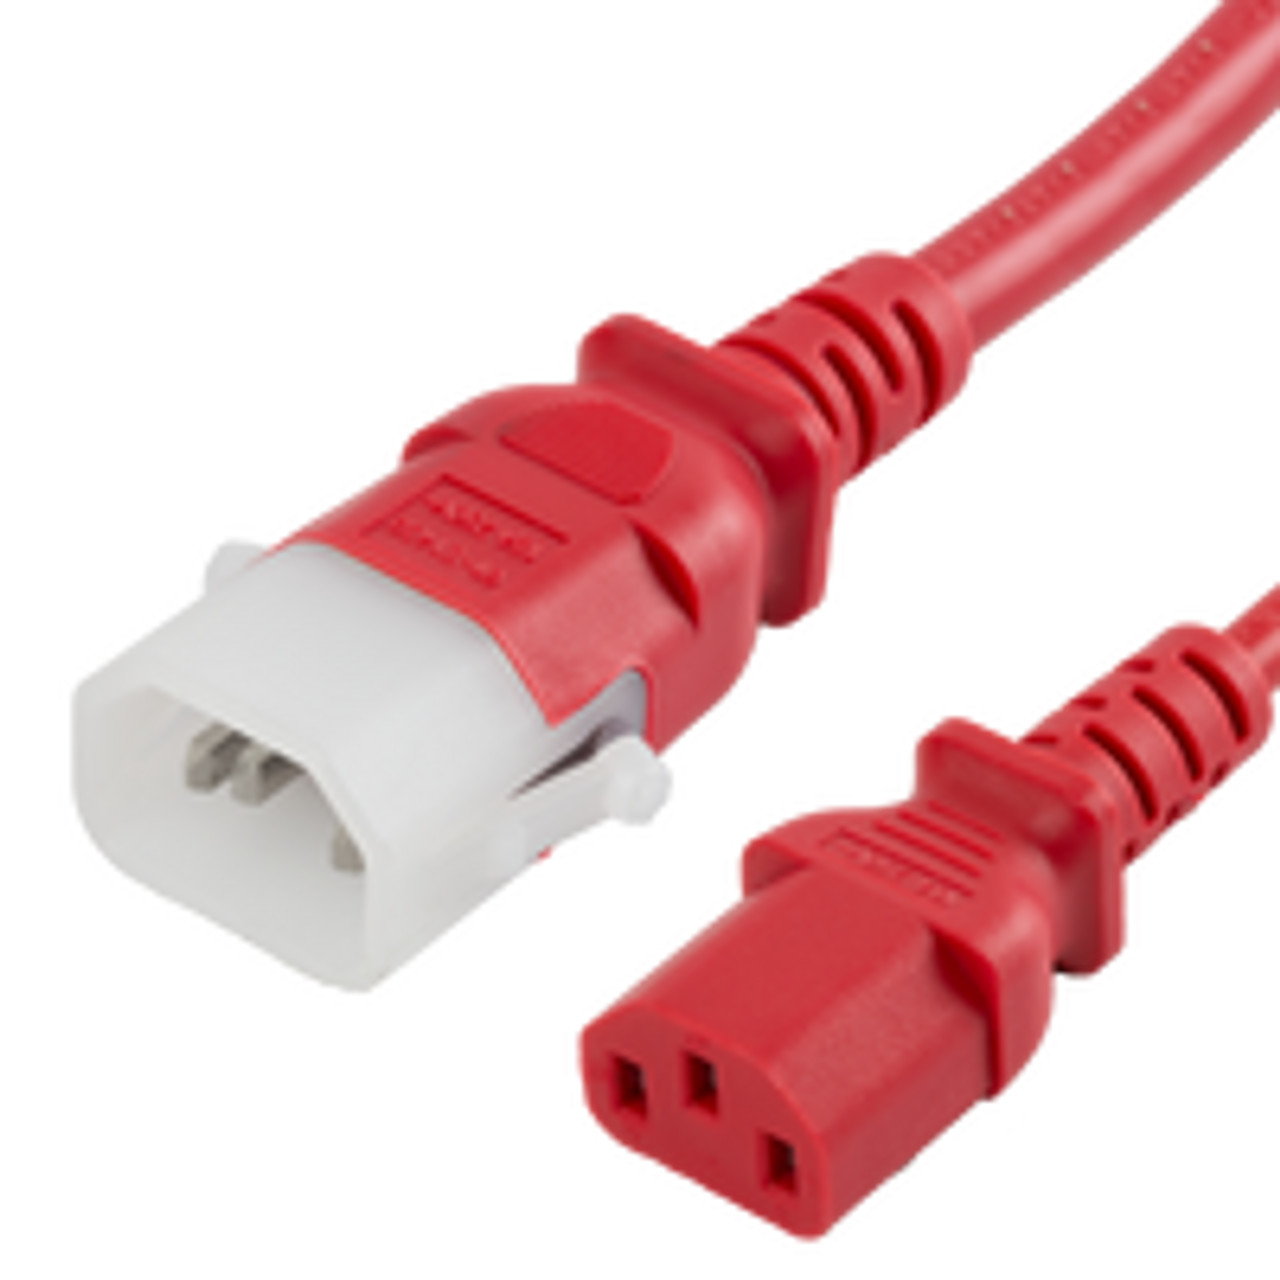 P-Lock Secure Locking Power Cord, C14 to C13, 18 AWG, 10Amp, 250V, SJT  Jacket, Red